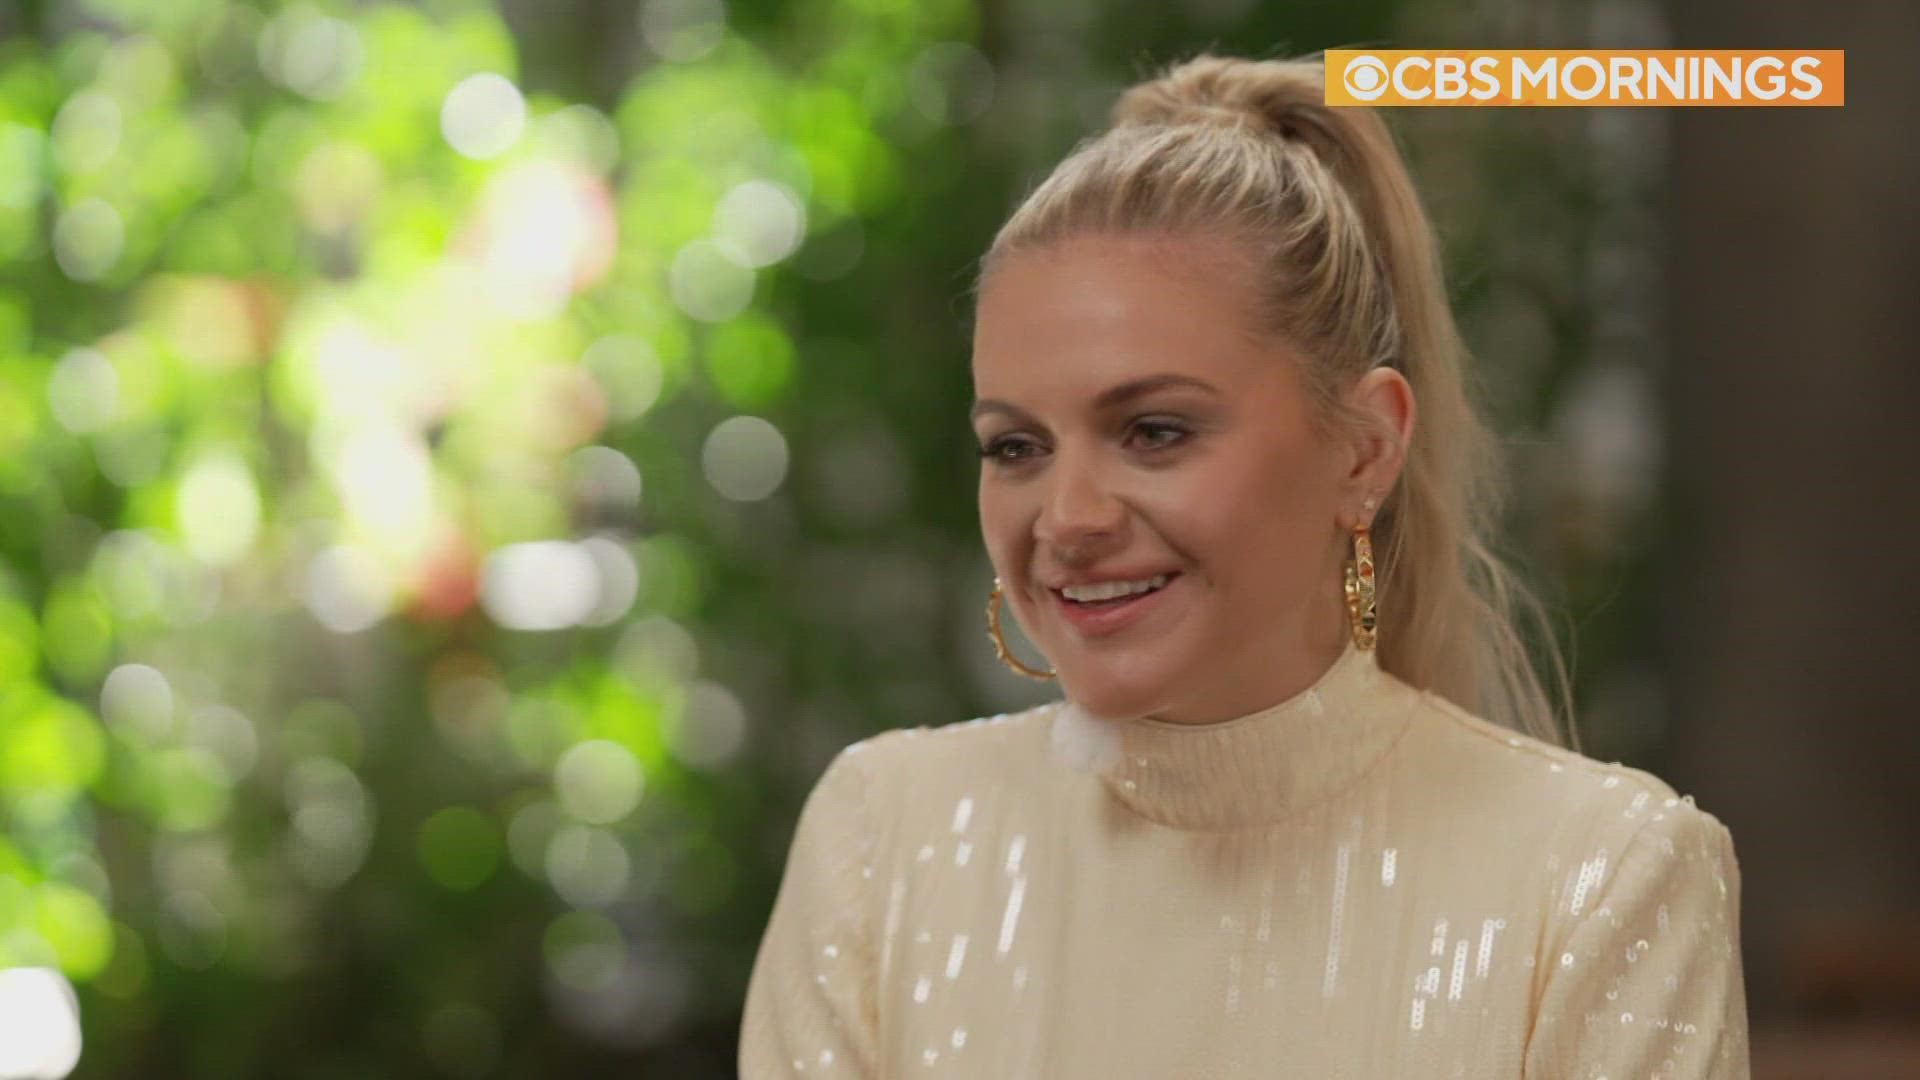 Country star Kelsea Ballerini spoke about celebrating her new album and navigating big changes in her life in an exclusive CBS Mornings interview.